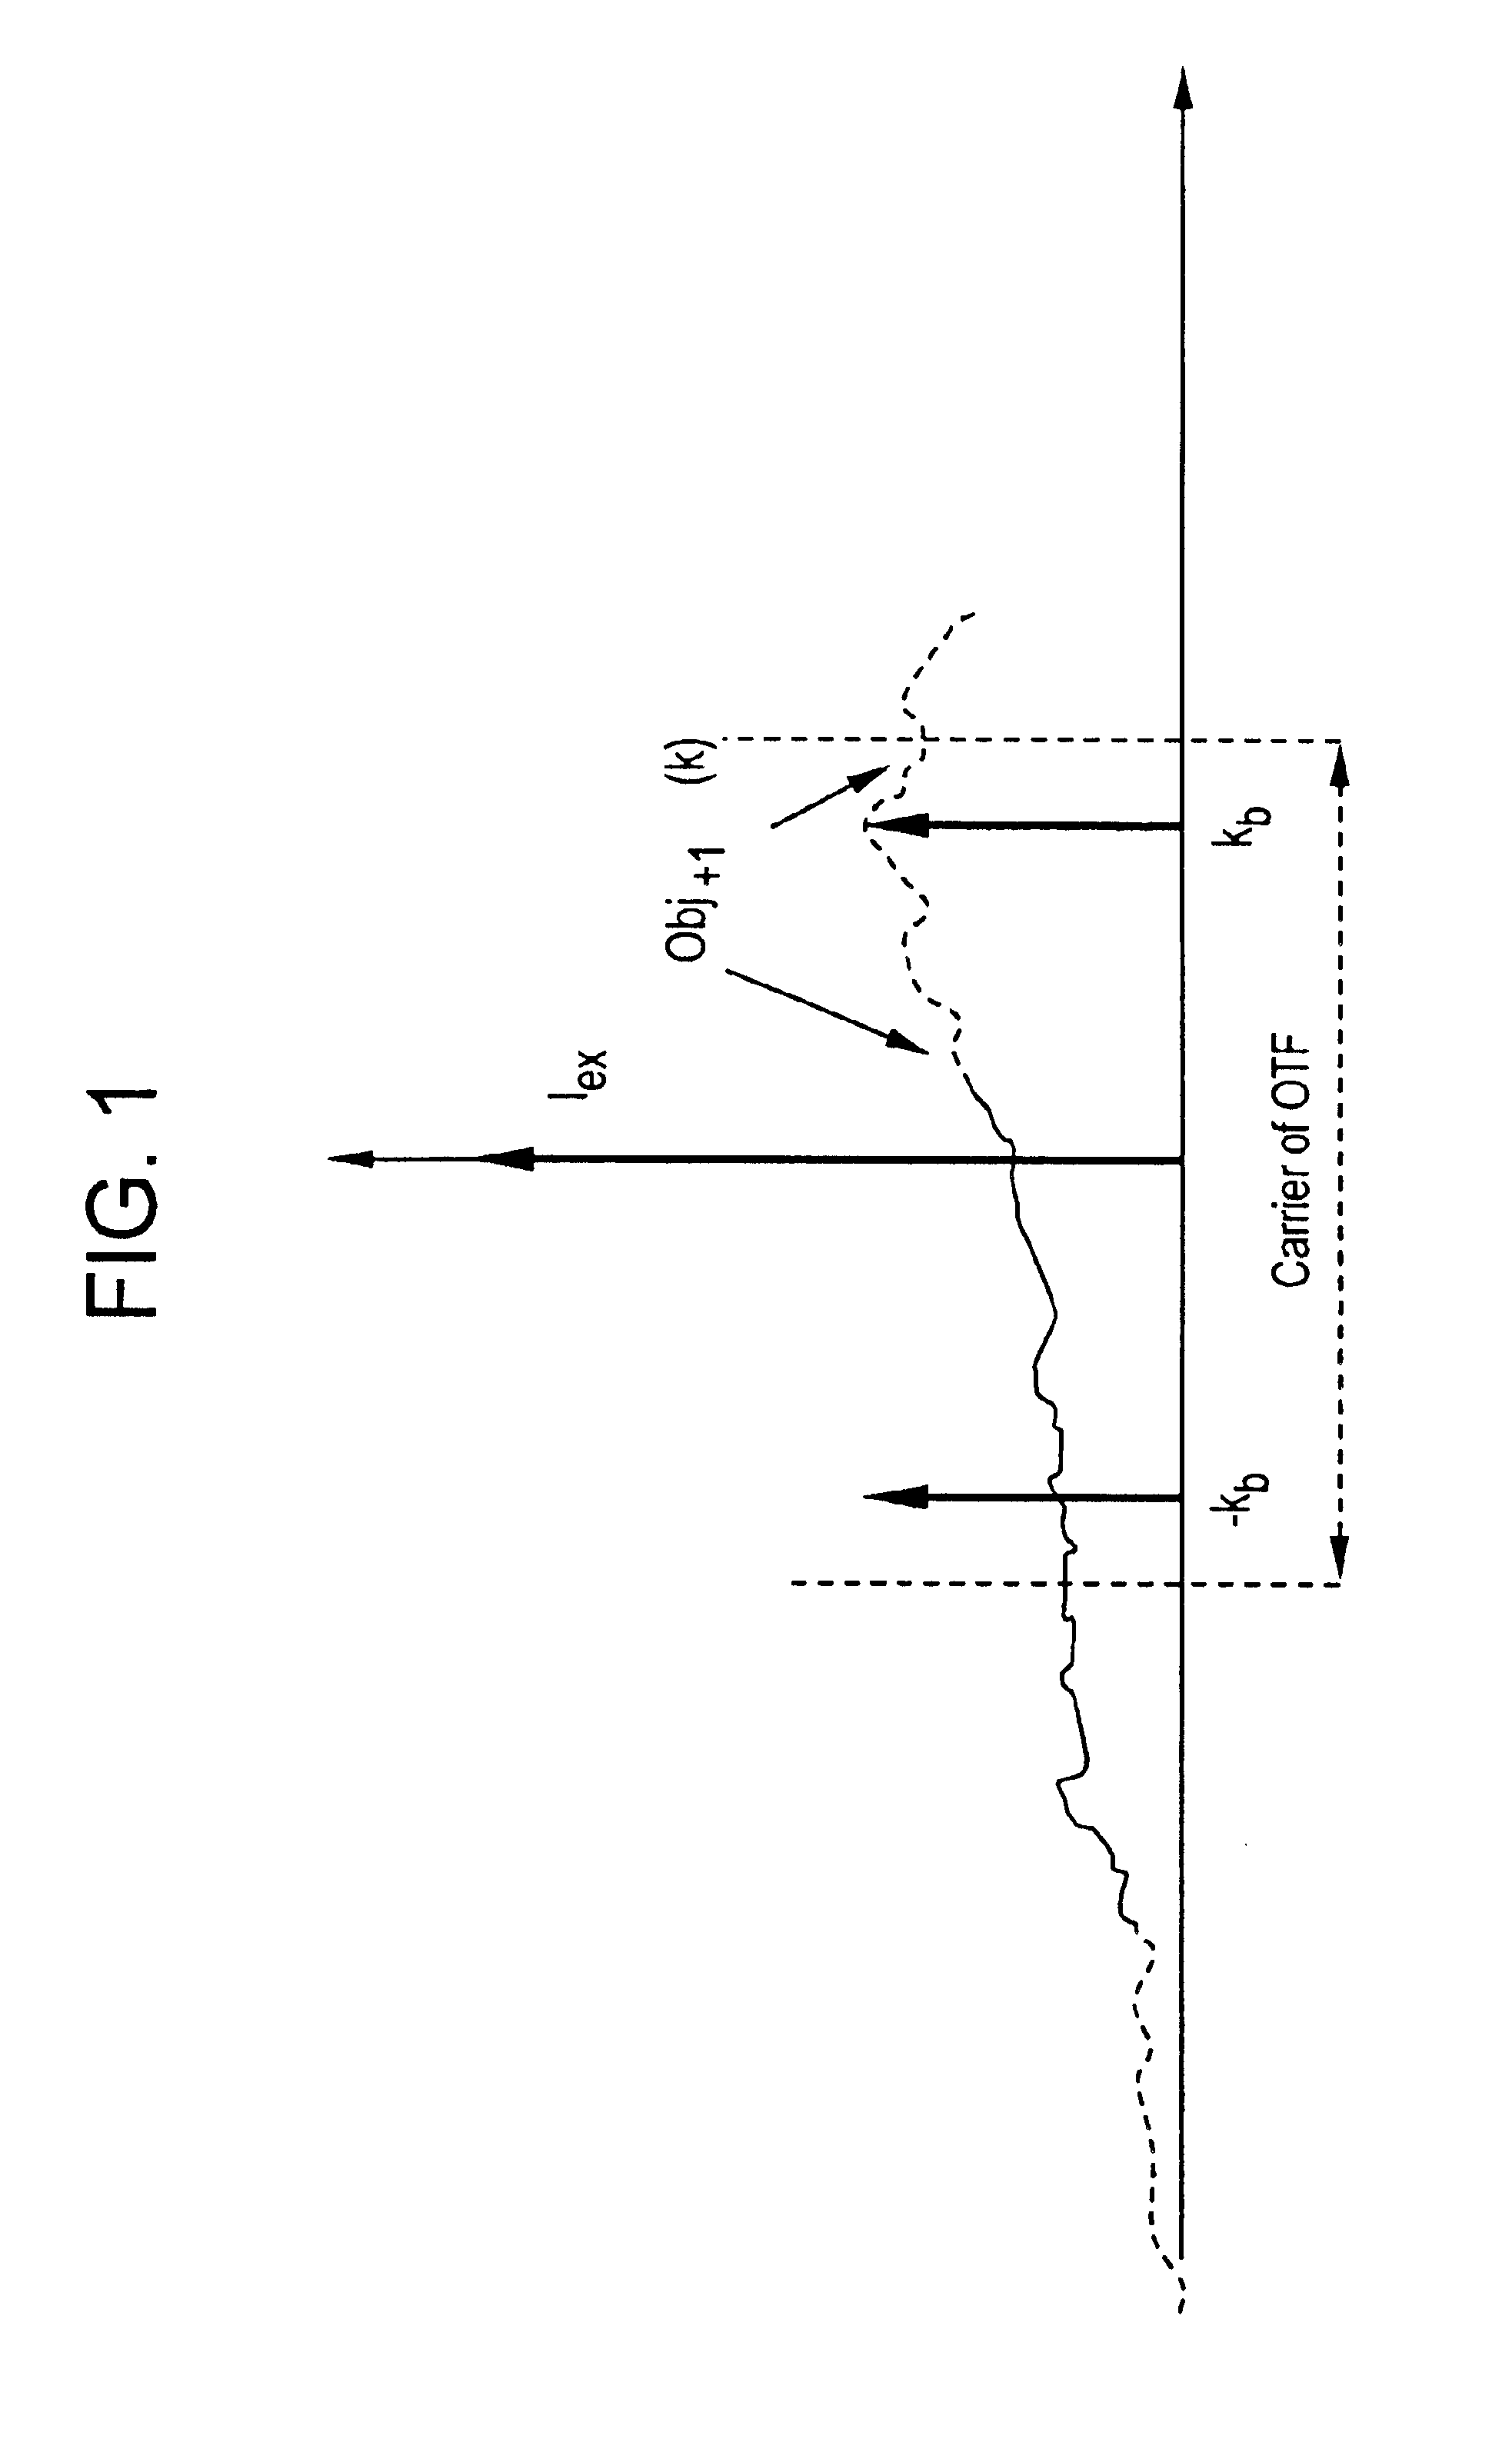 Method and device for representing an object